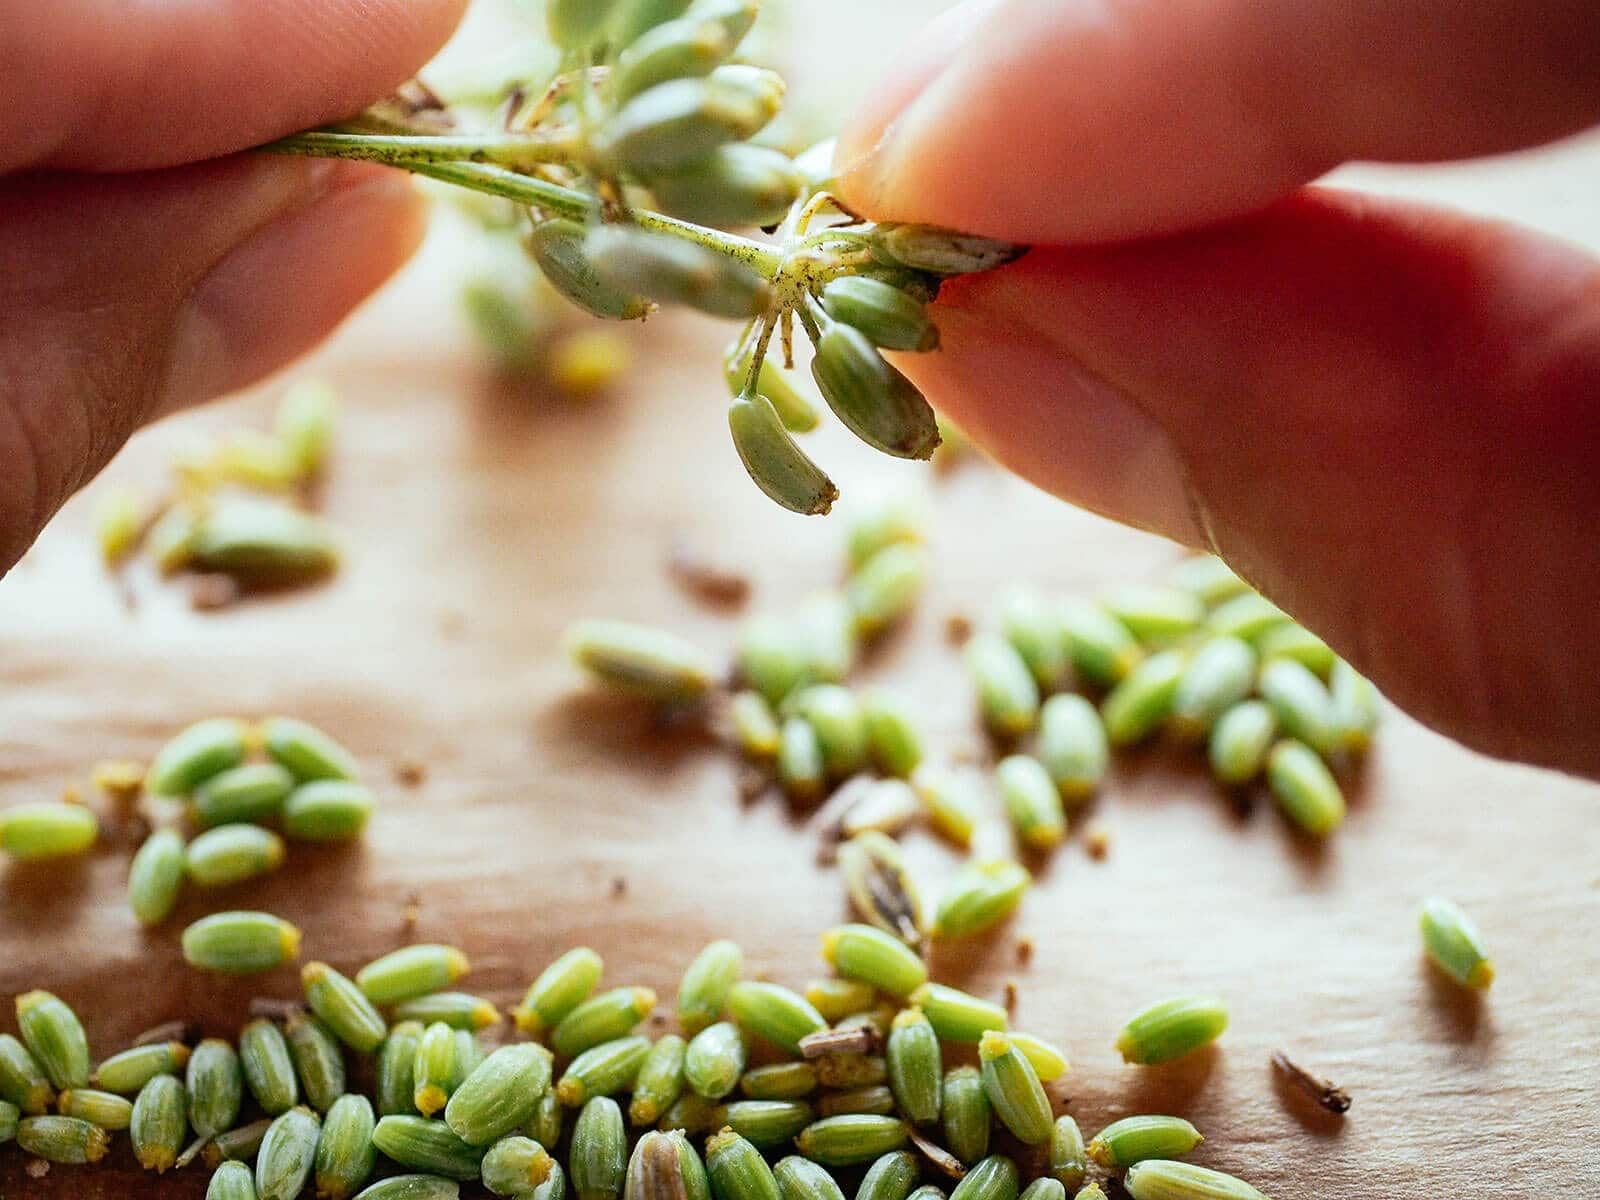 Fingers holding a fennel flower head and pulling green seeds off onto parchment paper